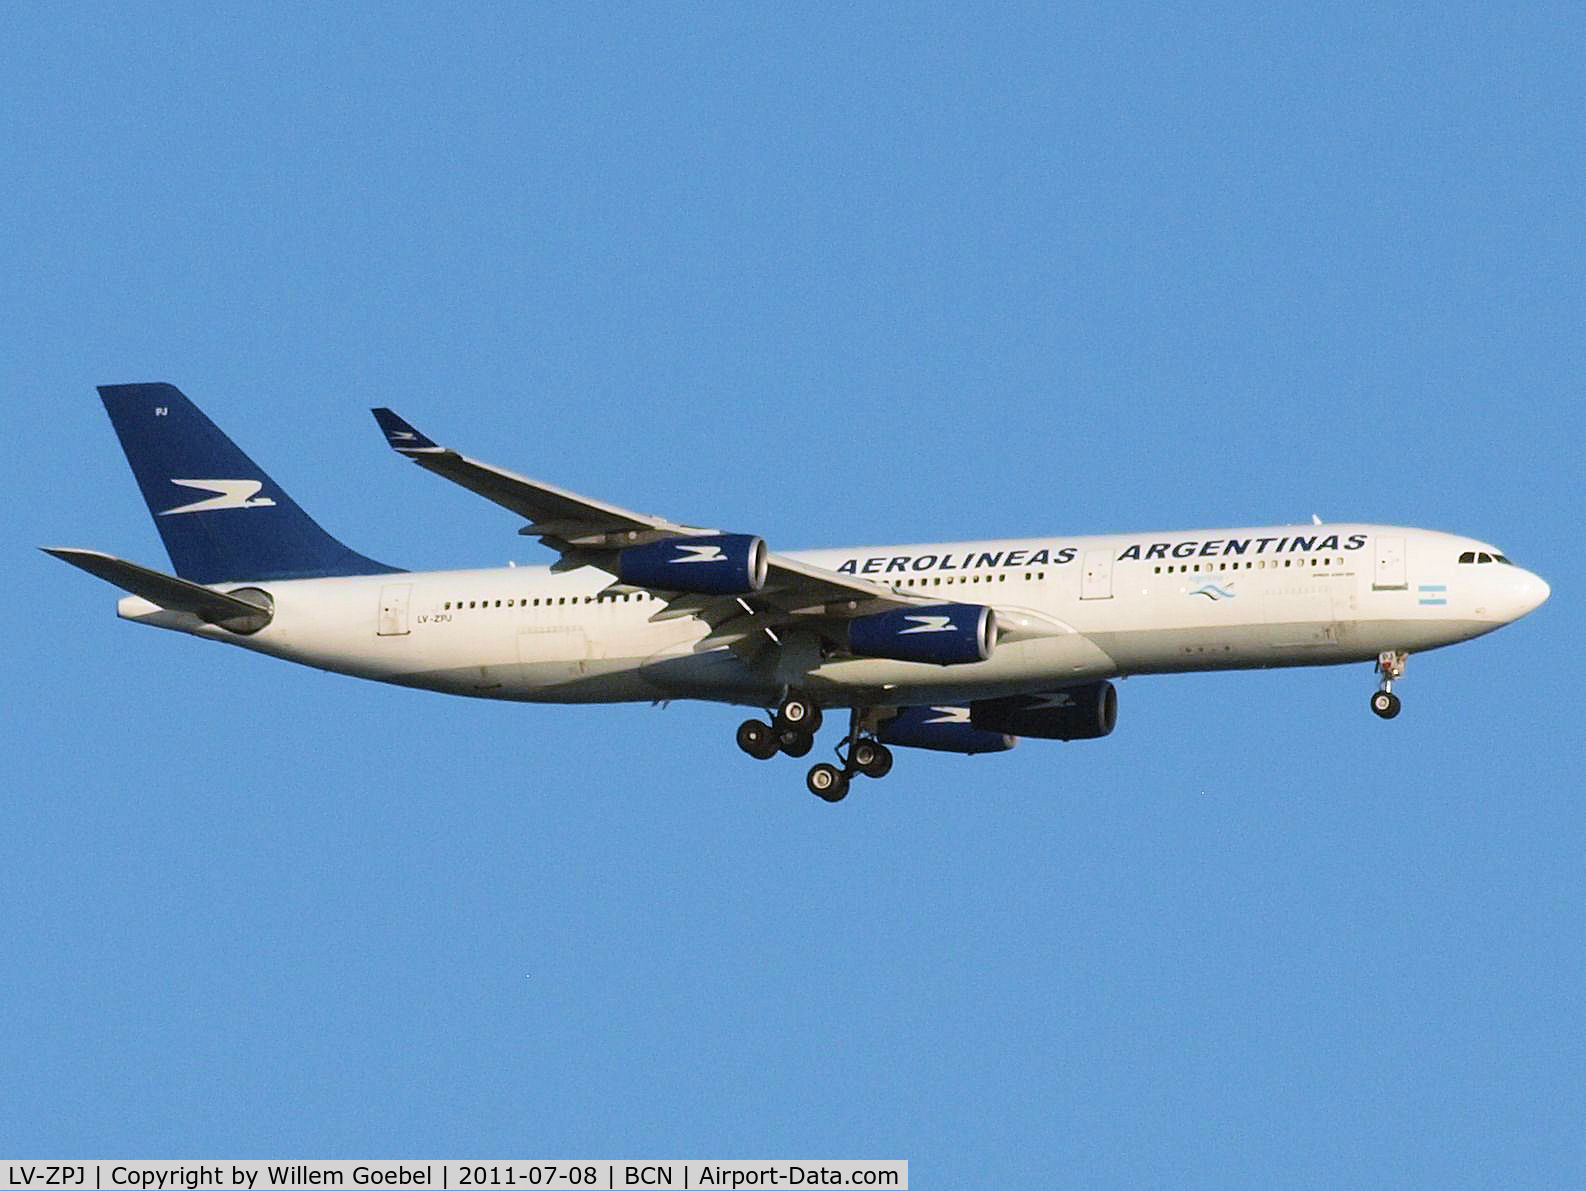 LV-ZPJ, 1994 Airbus A340-211 C/N 074, Prepare for landing on Barcelona Airport